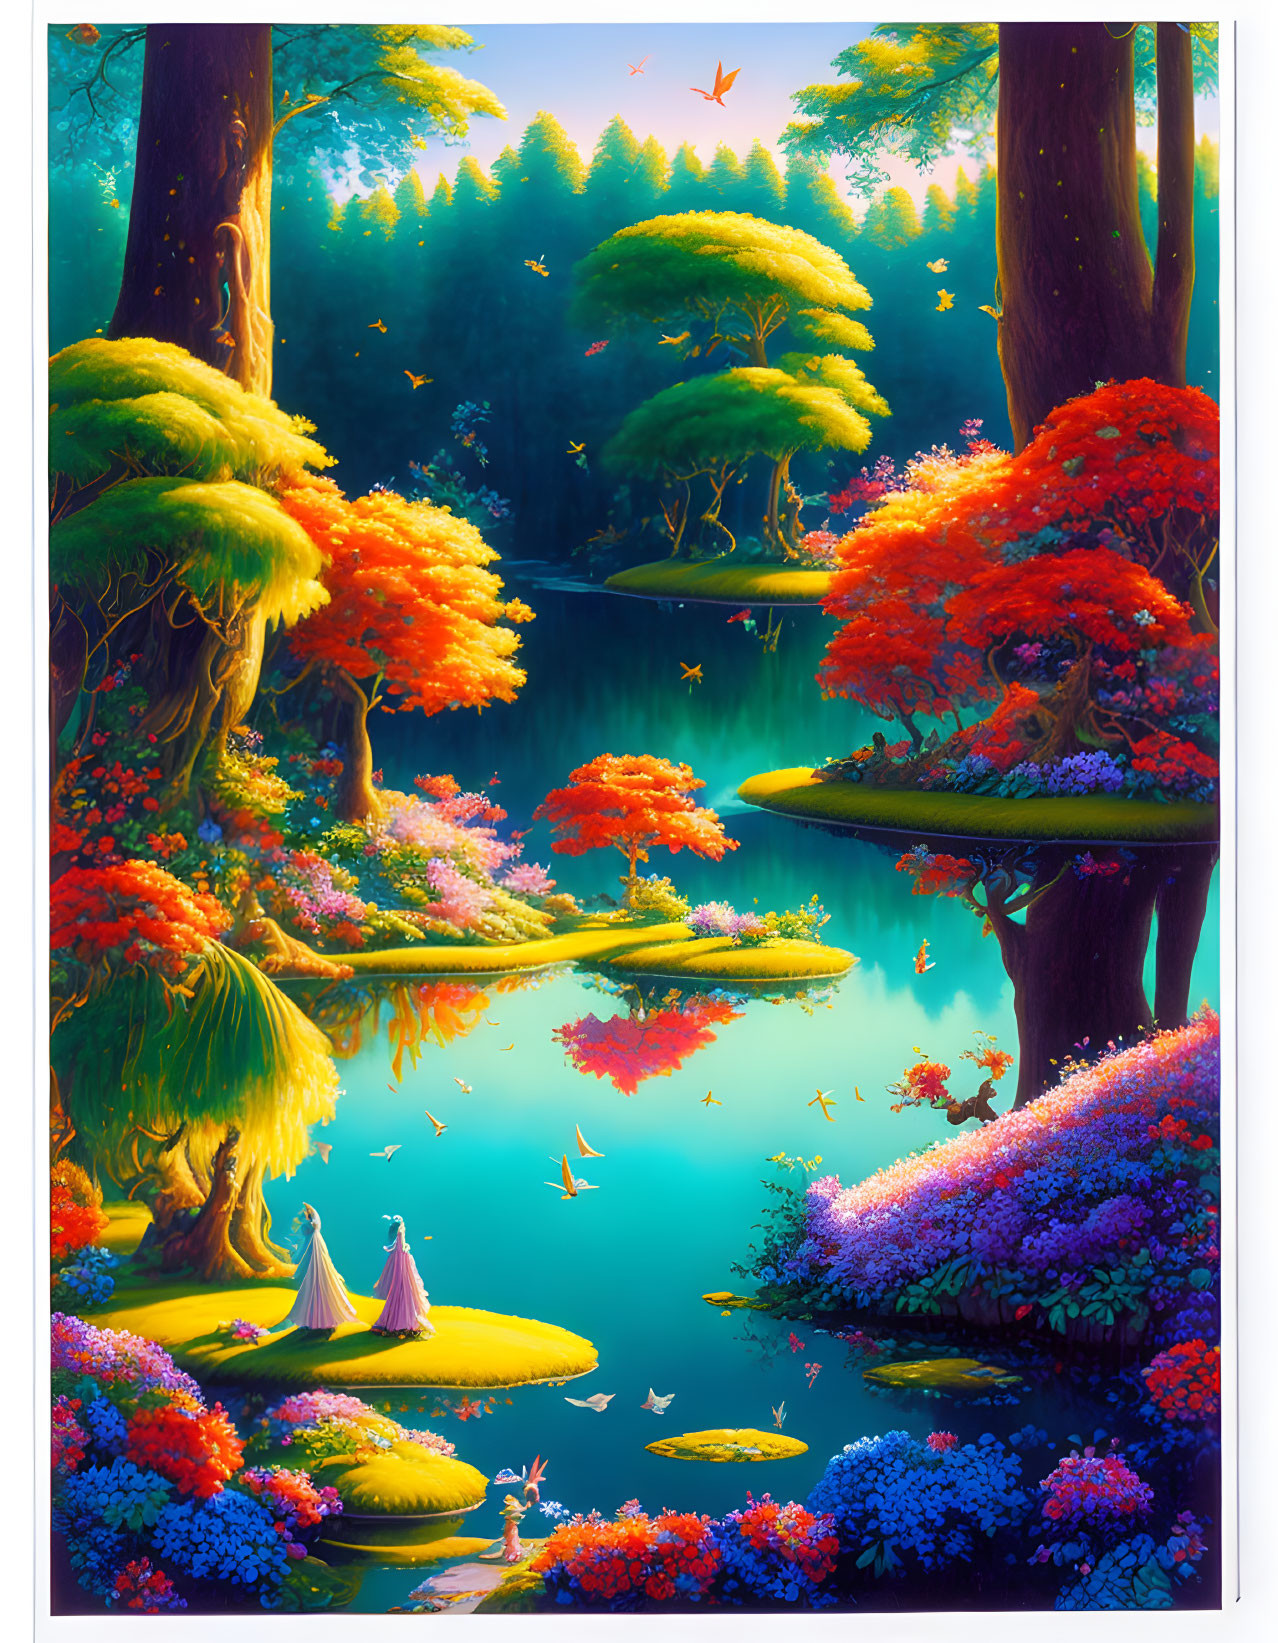 Colorful forest scene with serene lake and floating lily pads